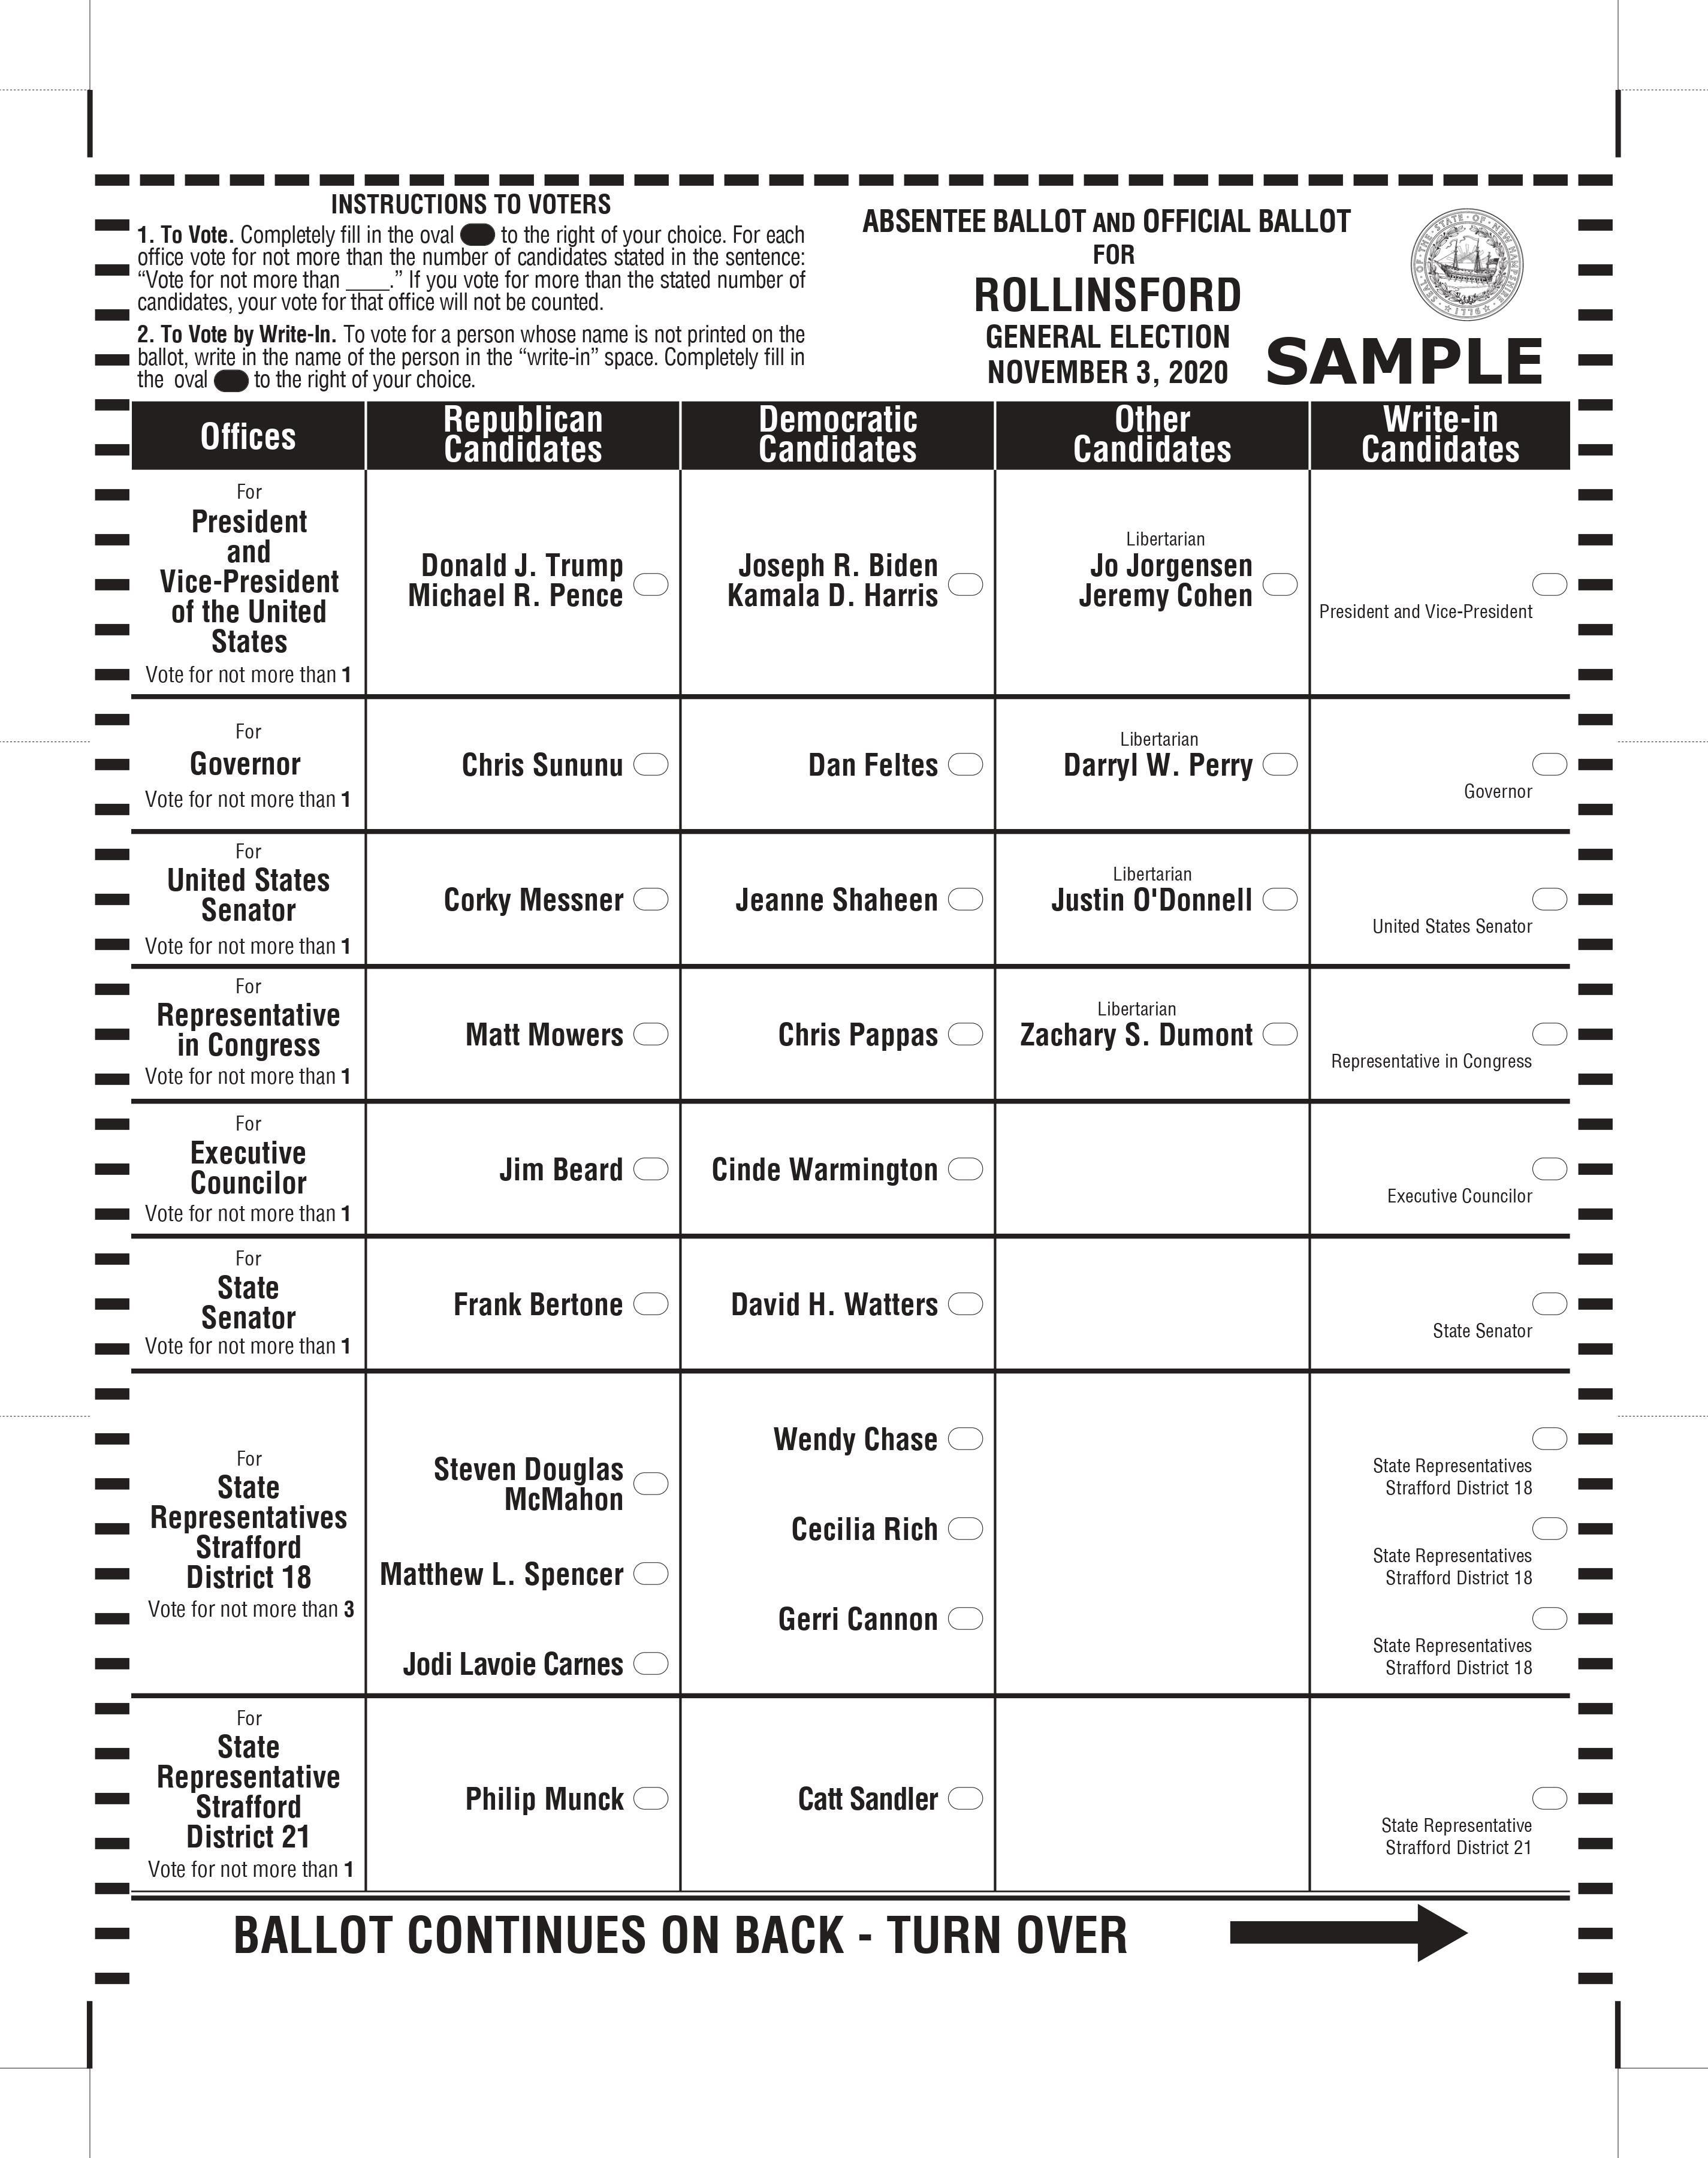 [Rollinsford 2020 Ballot Page 1]